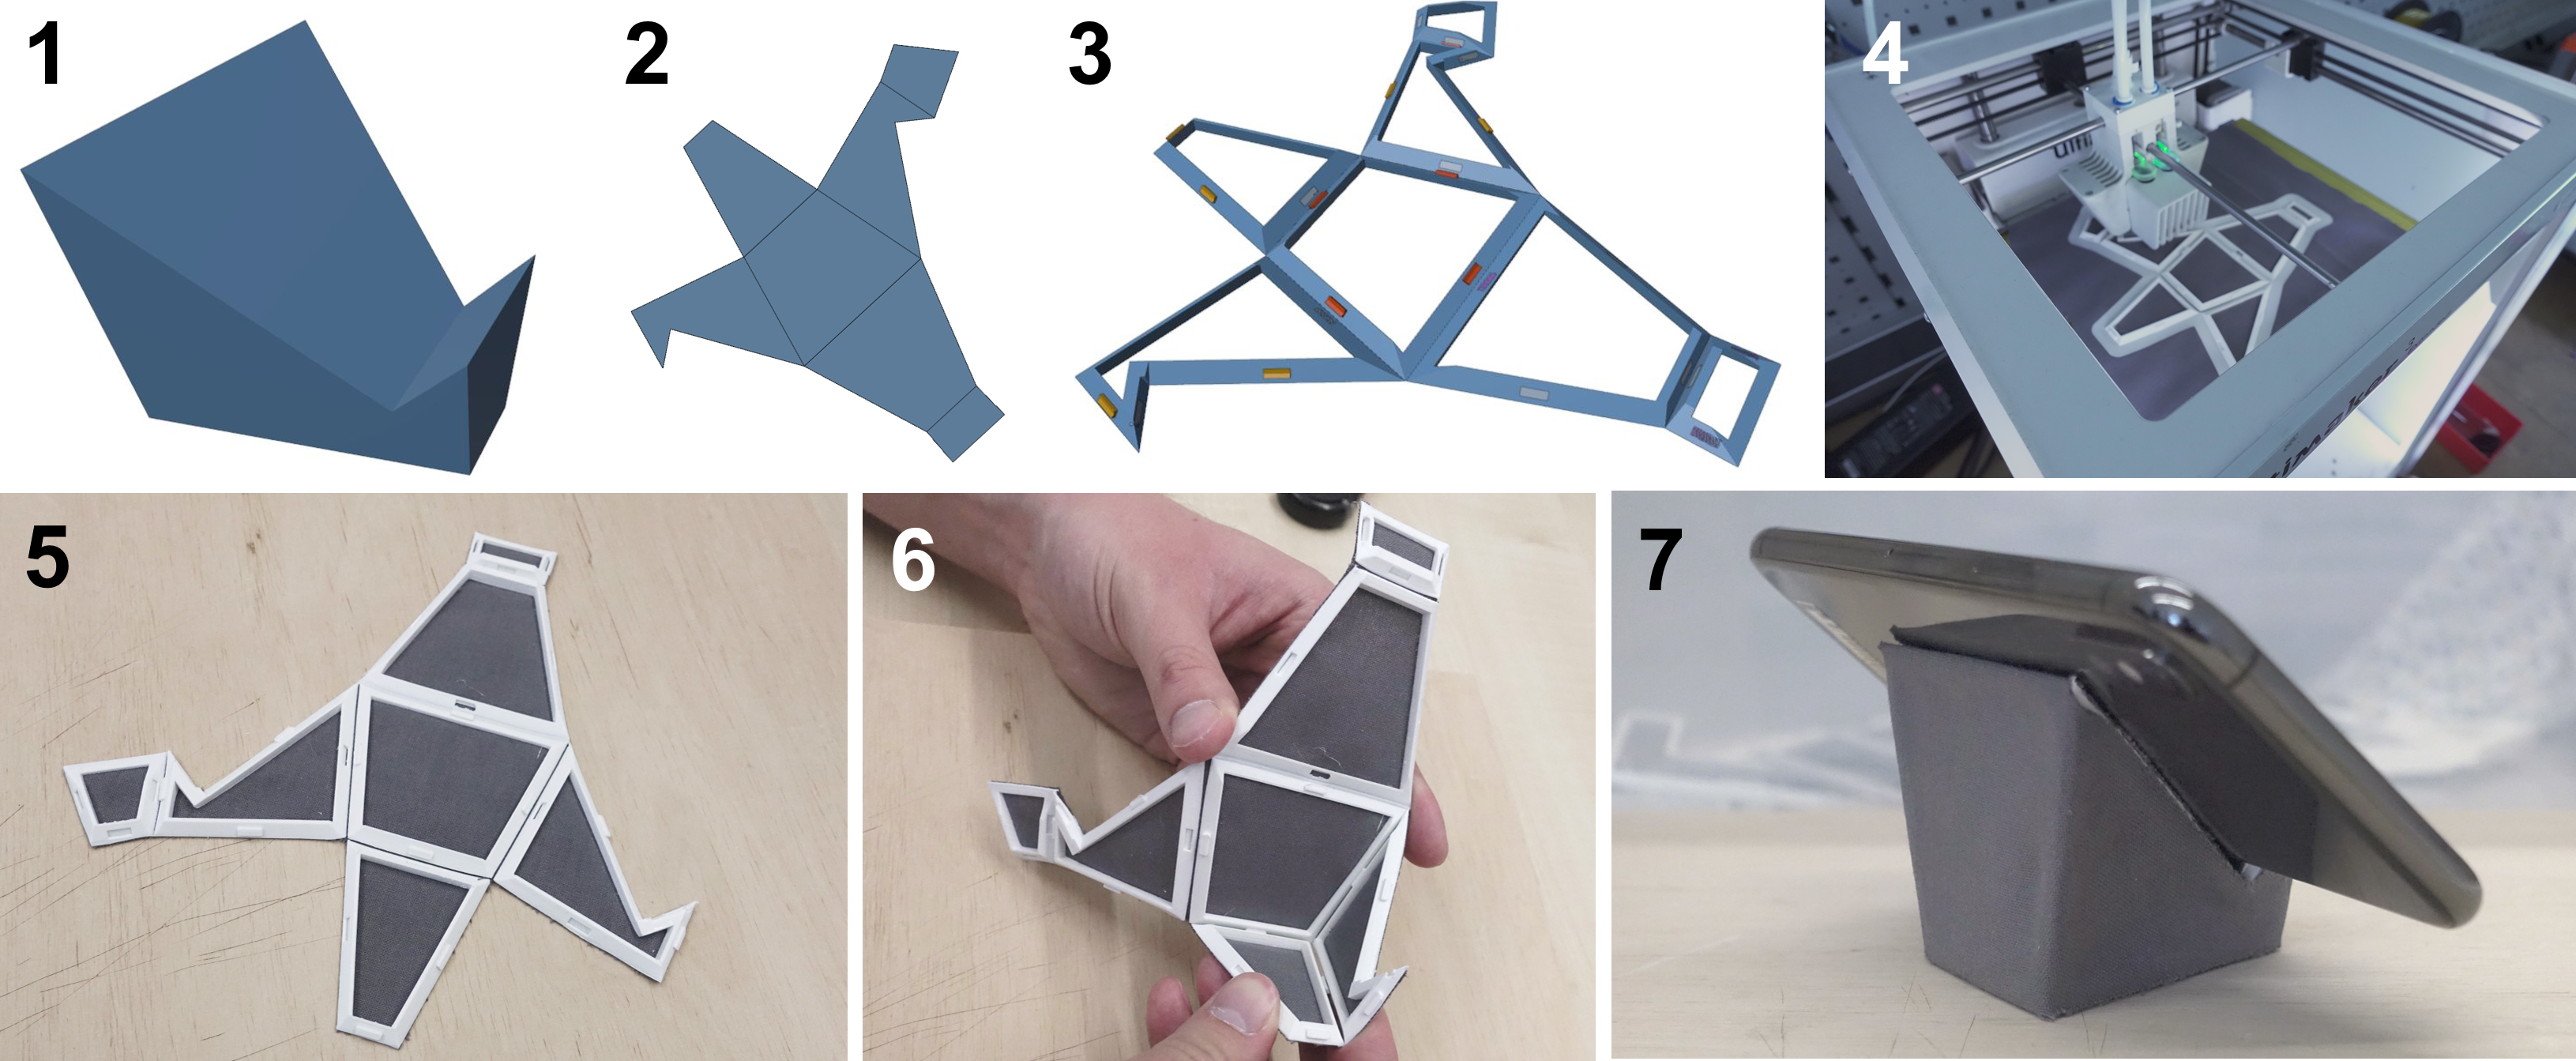 Fabric Faces: Combining Textiles and 3D Printing for Maker-Friendly Folding-Based Assembly